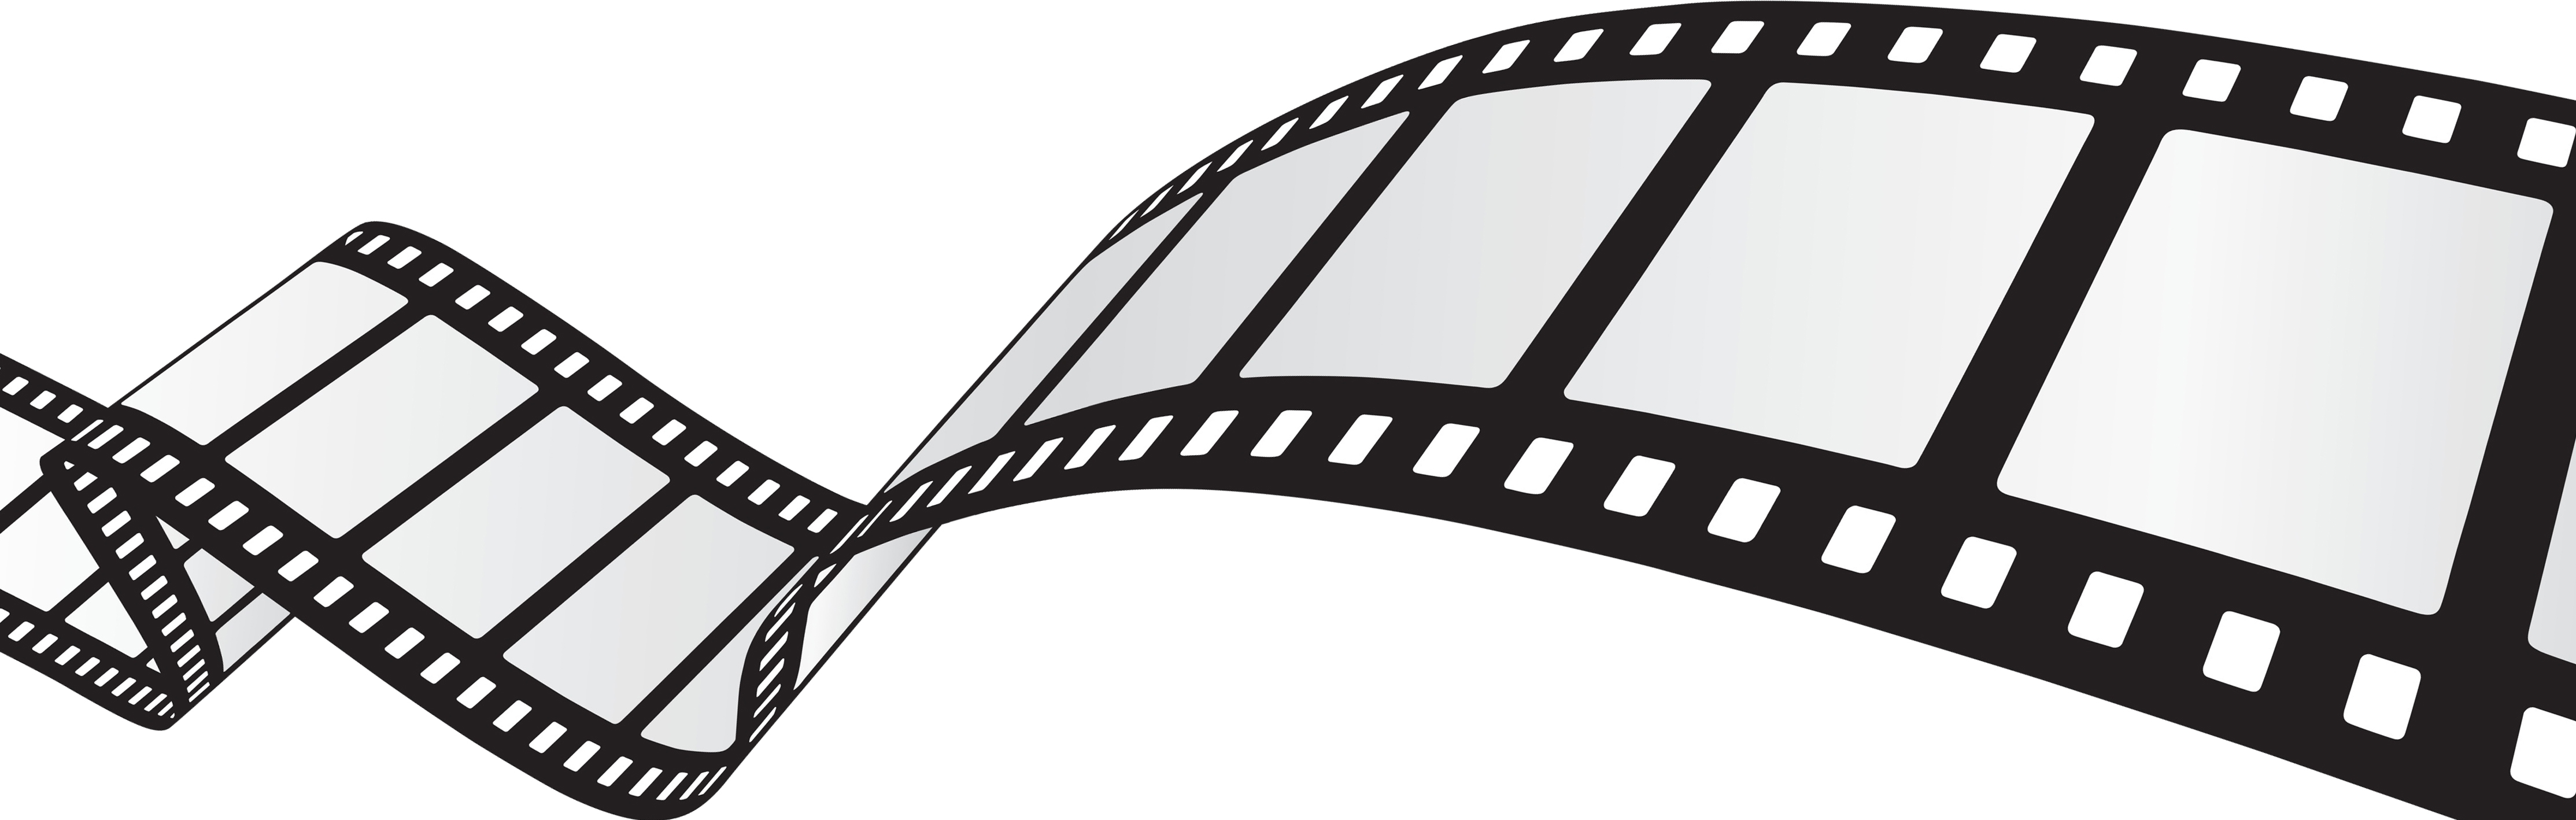 clipart of movie reel - photo #38